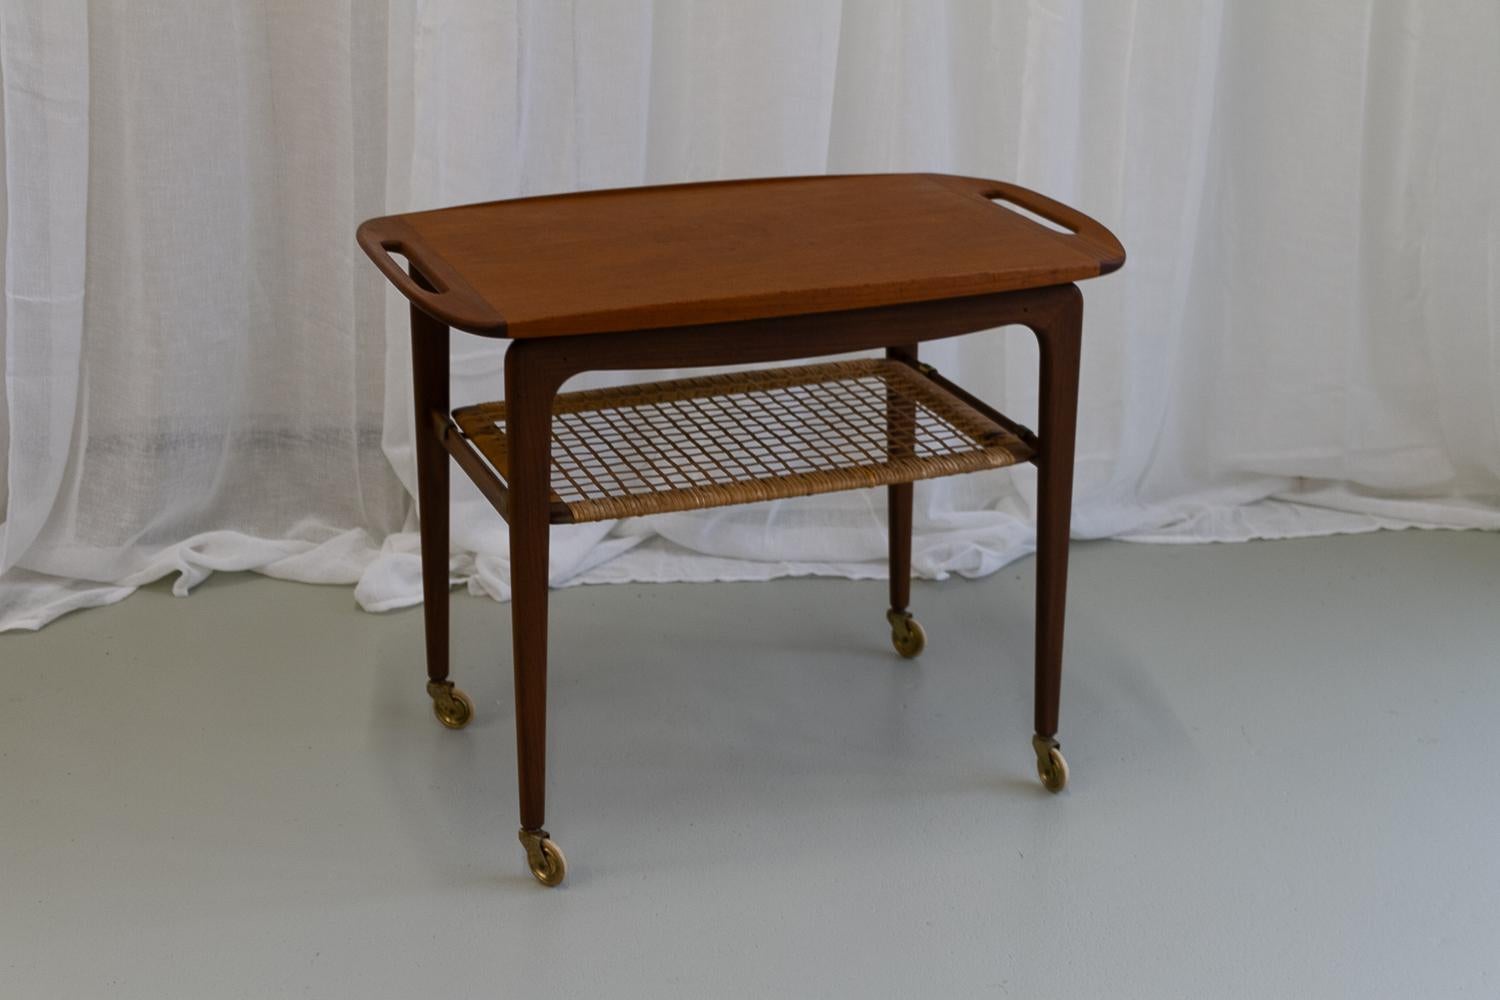 Vintage Danish teak serving trolley by Johannes Andersen, 1960s.

Danish modern serving cart in teak and cane attributed to Johannes Andersen for CFC Møbler, Denmark. Removable teak tray with handles in solid teak that can be used as a serving tray.